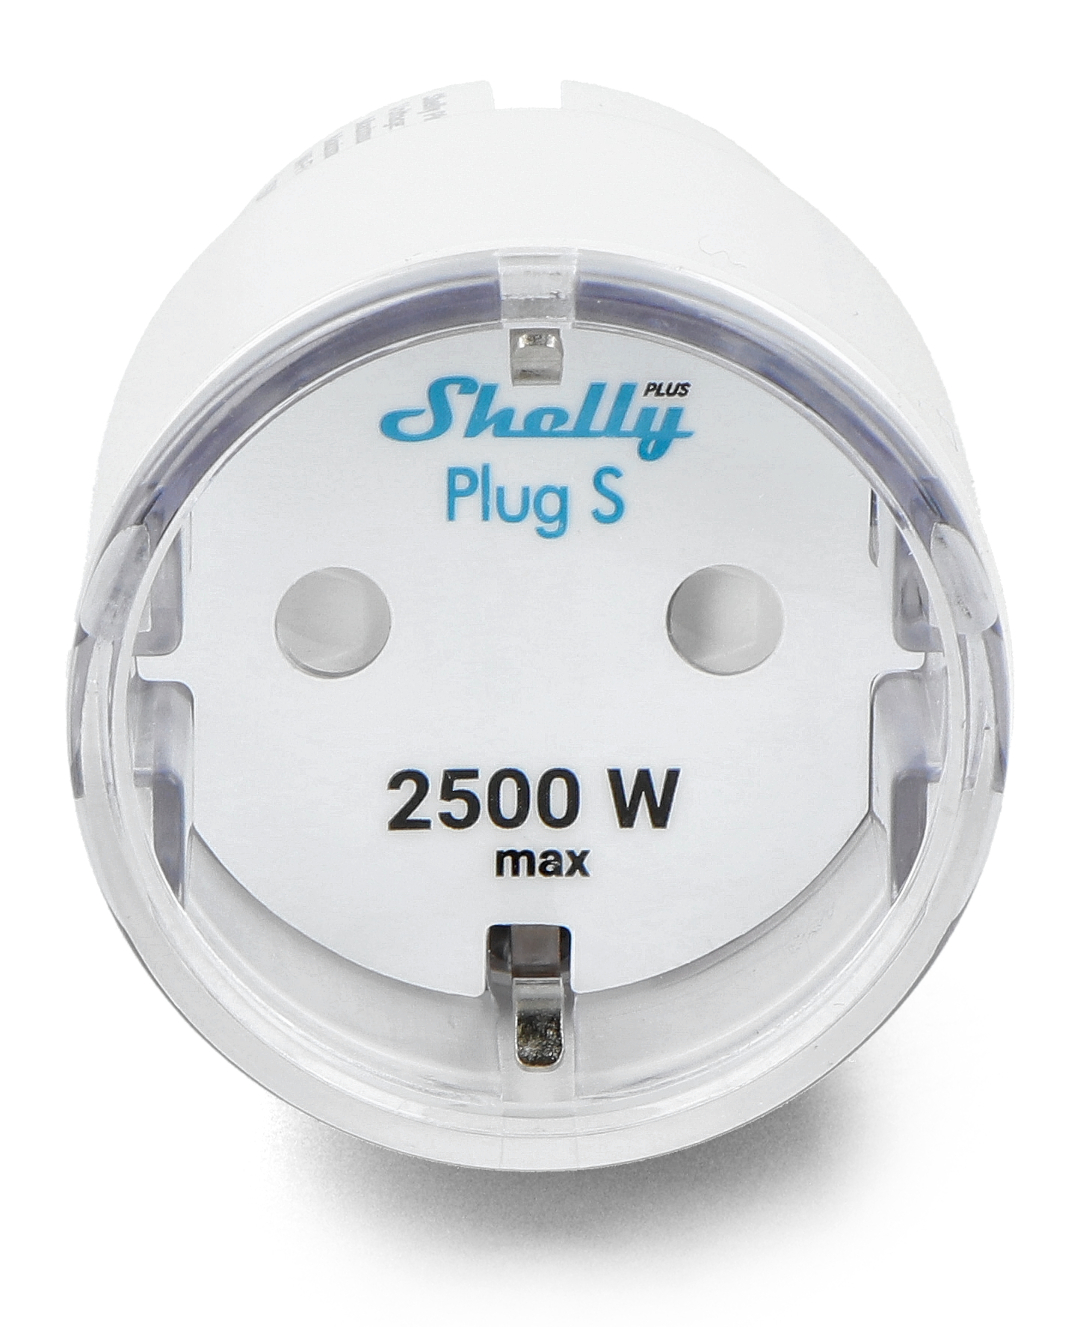 SHELLY - WiFi Smart Plug Power Meter Outlet Shelly Plug S - SMARTHOME EUROPE